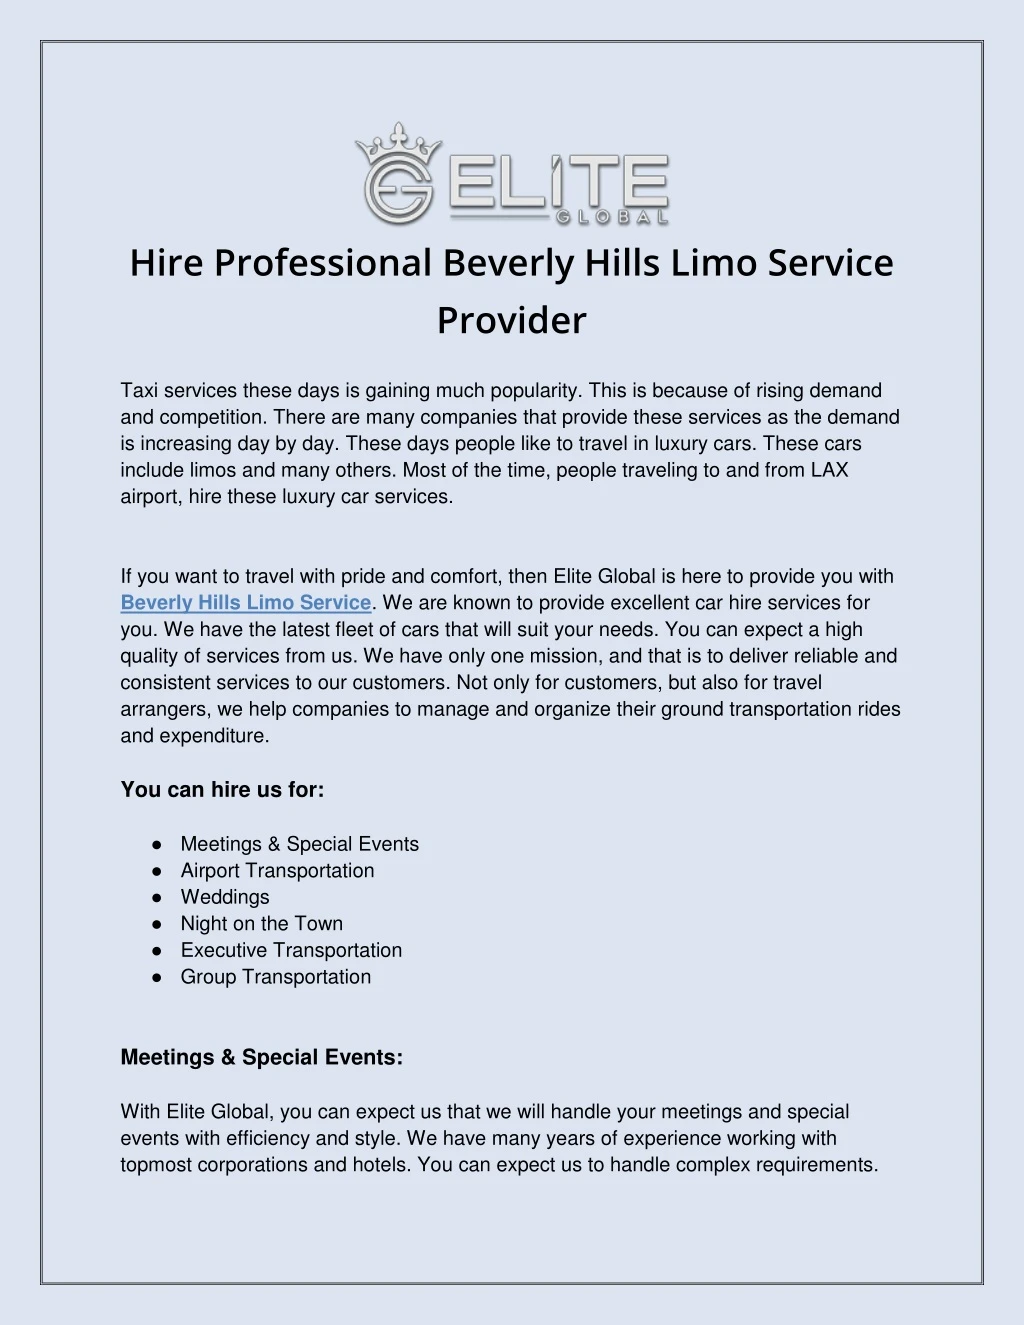 hire professional beverly hills limo service